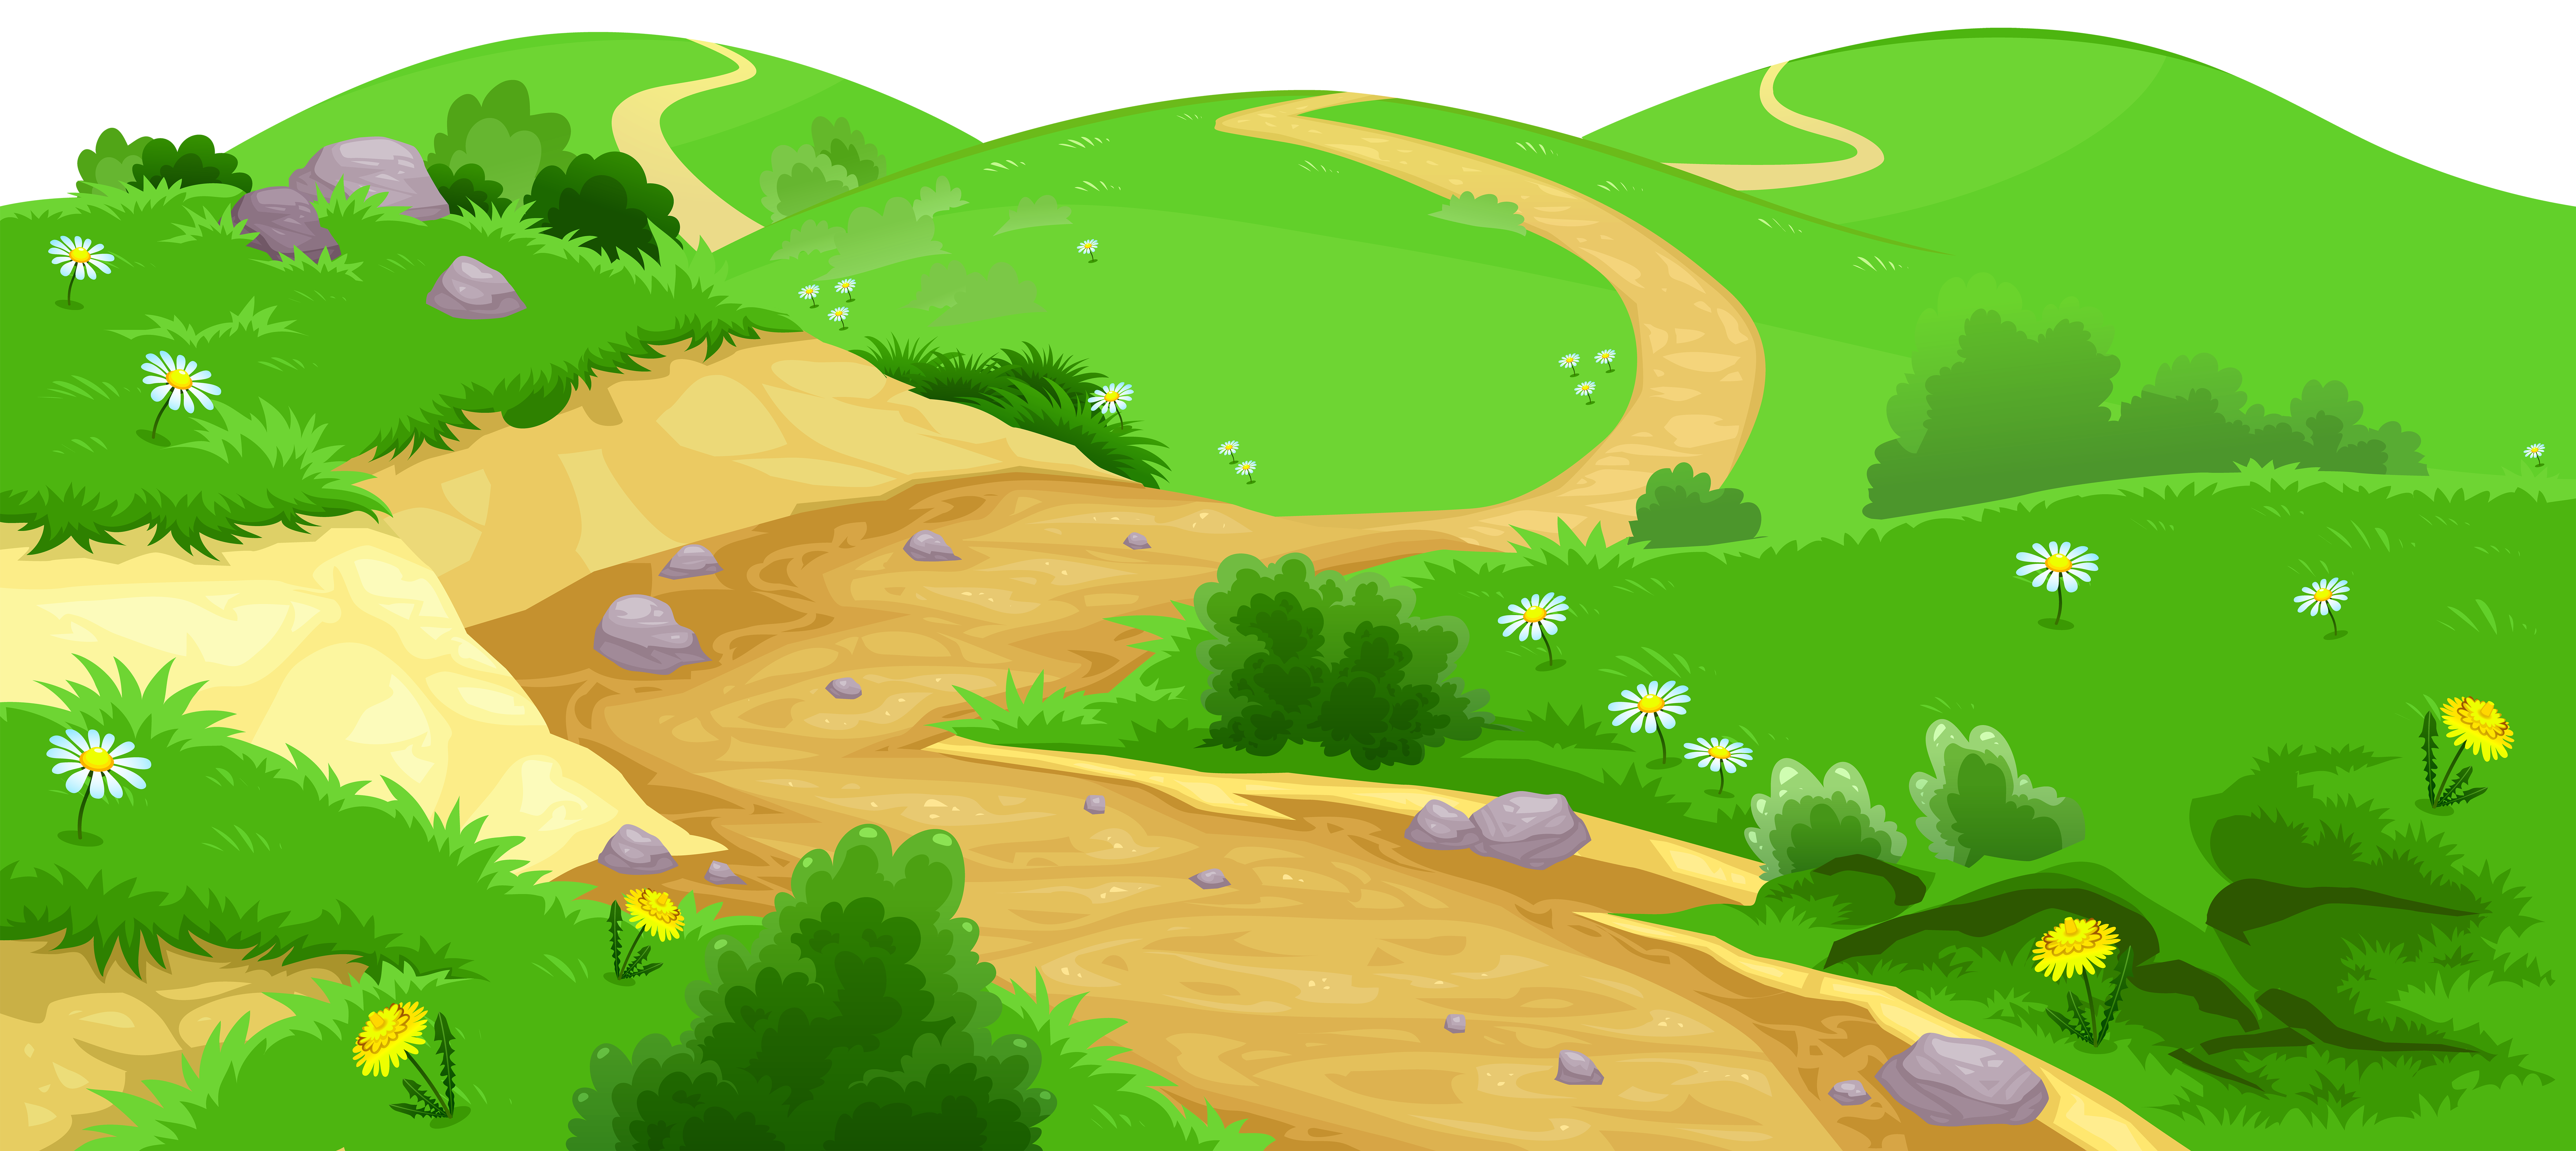 Outdoors clipart ground. Valley transparent png image